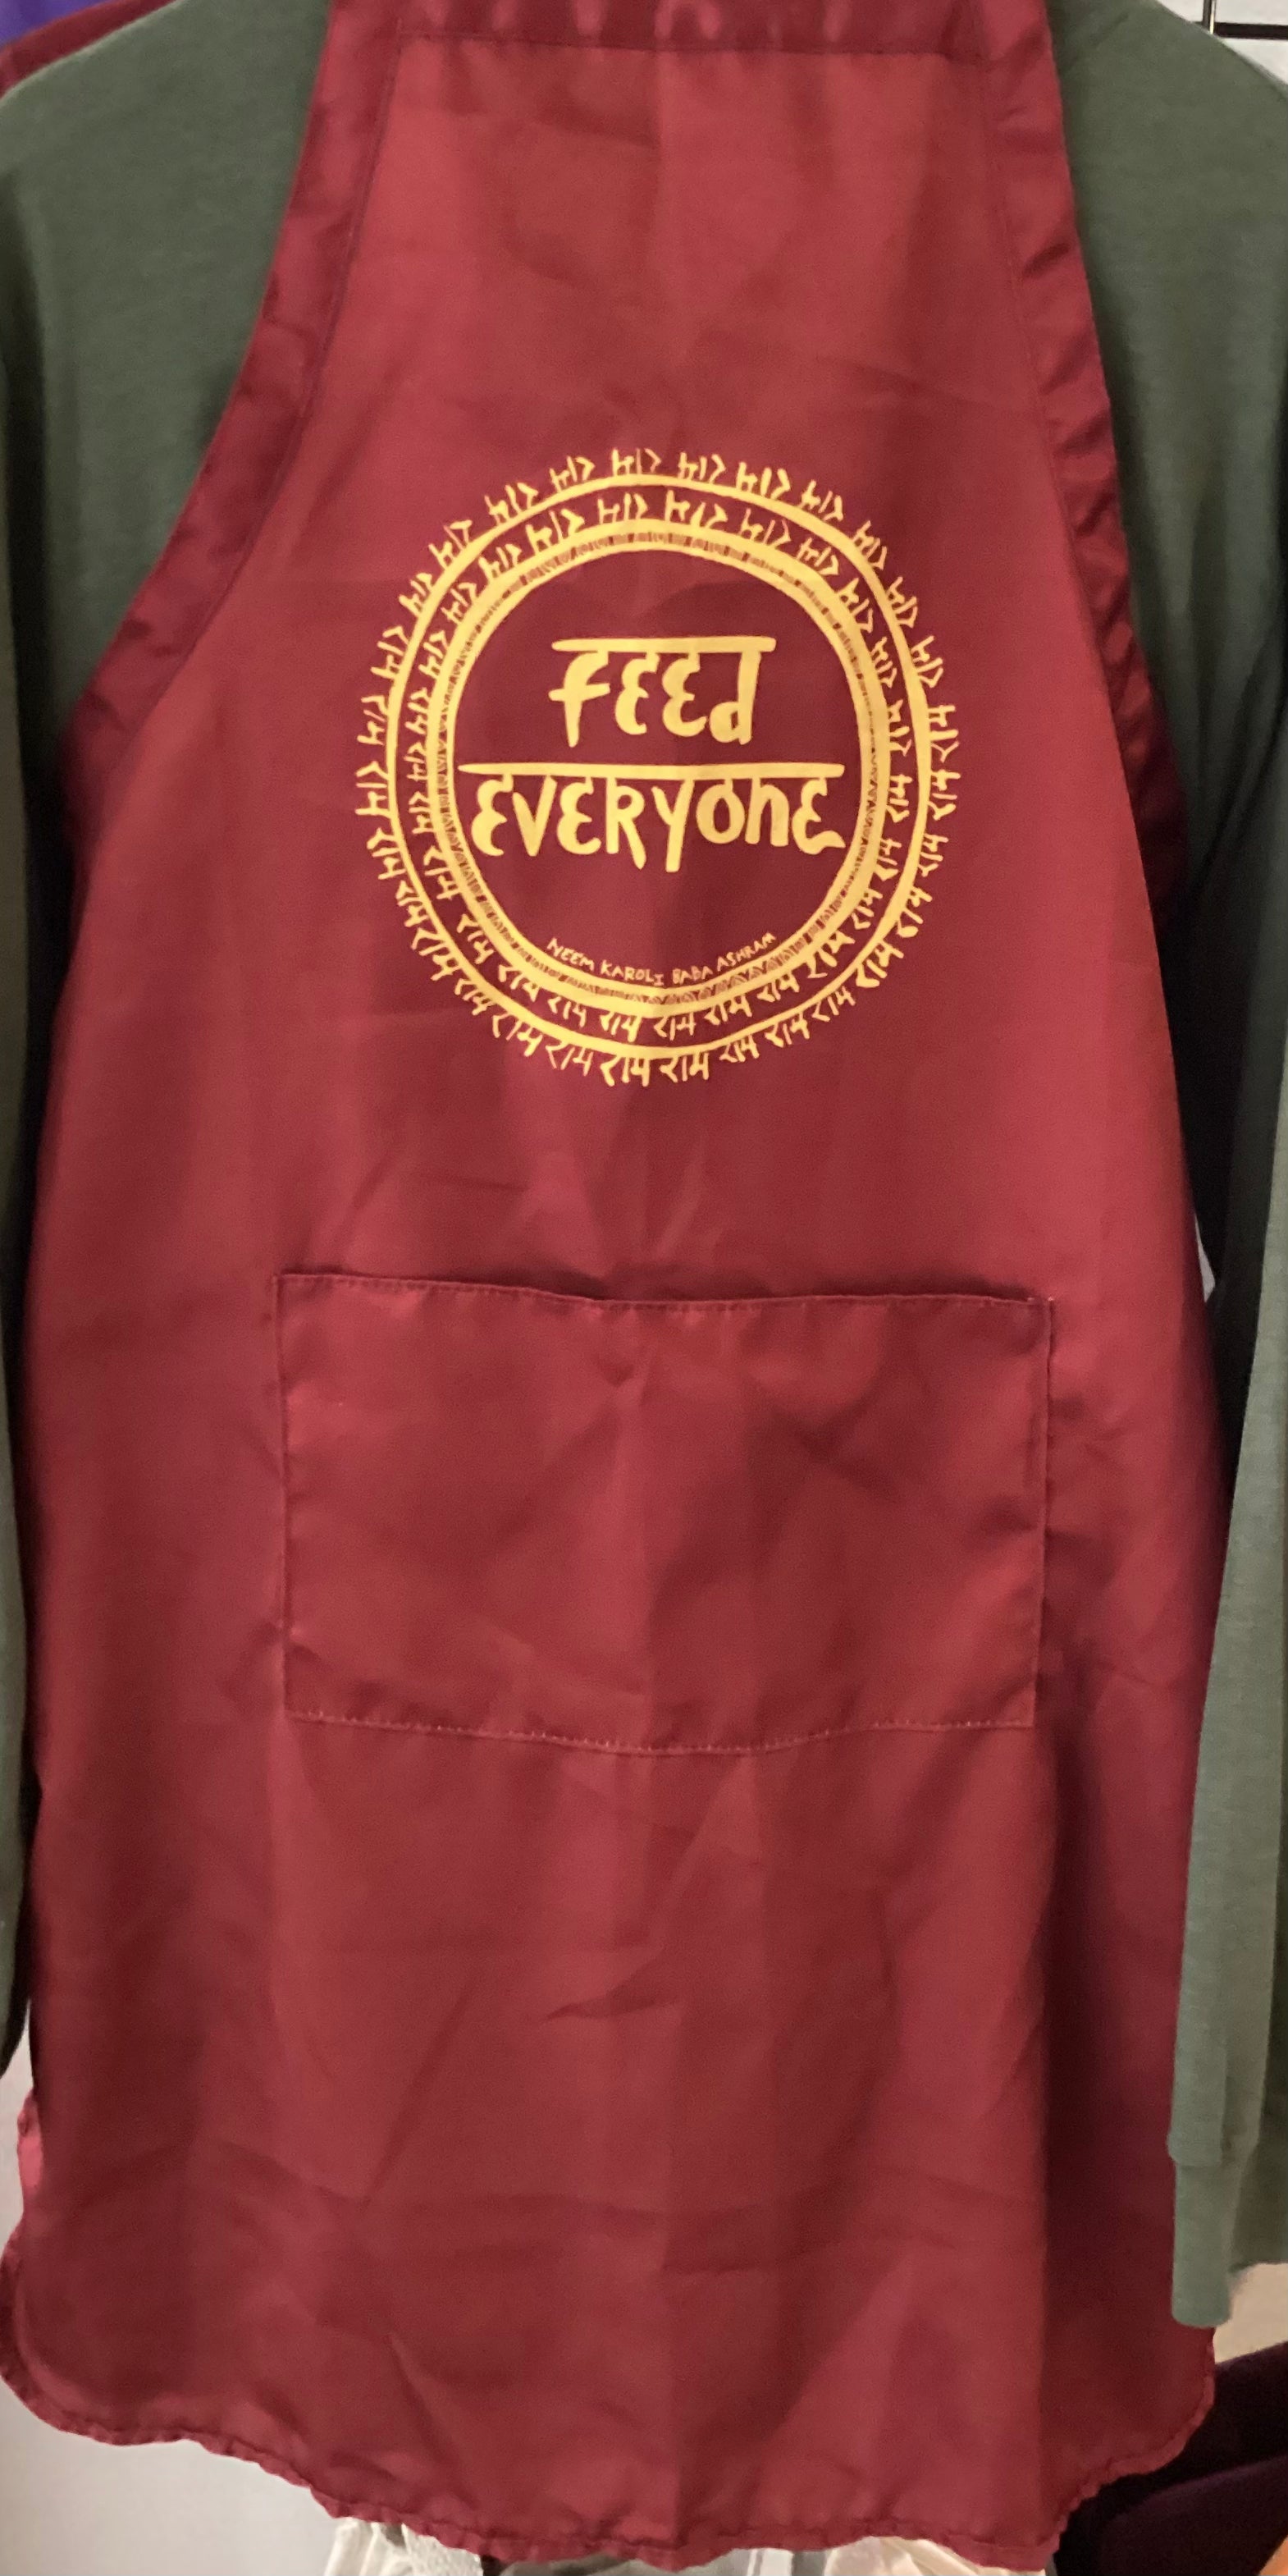 New Style "FEED EVERYONE" Apron